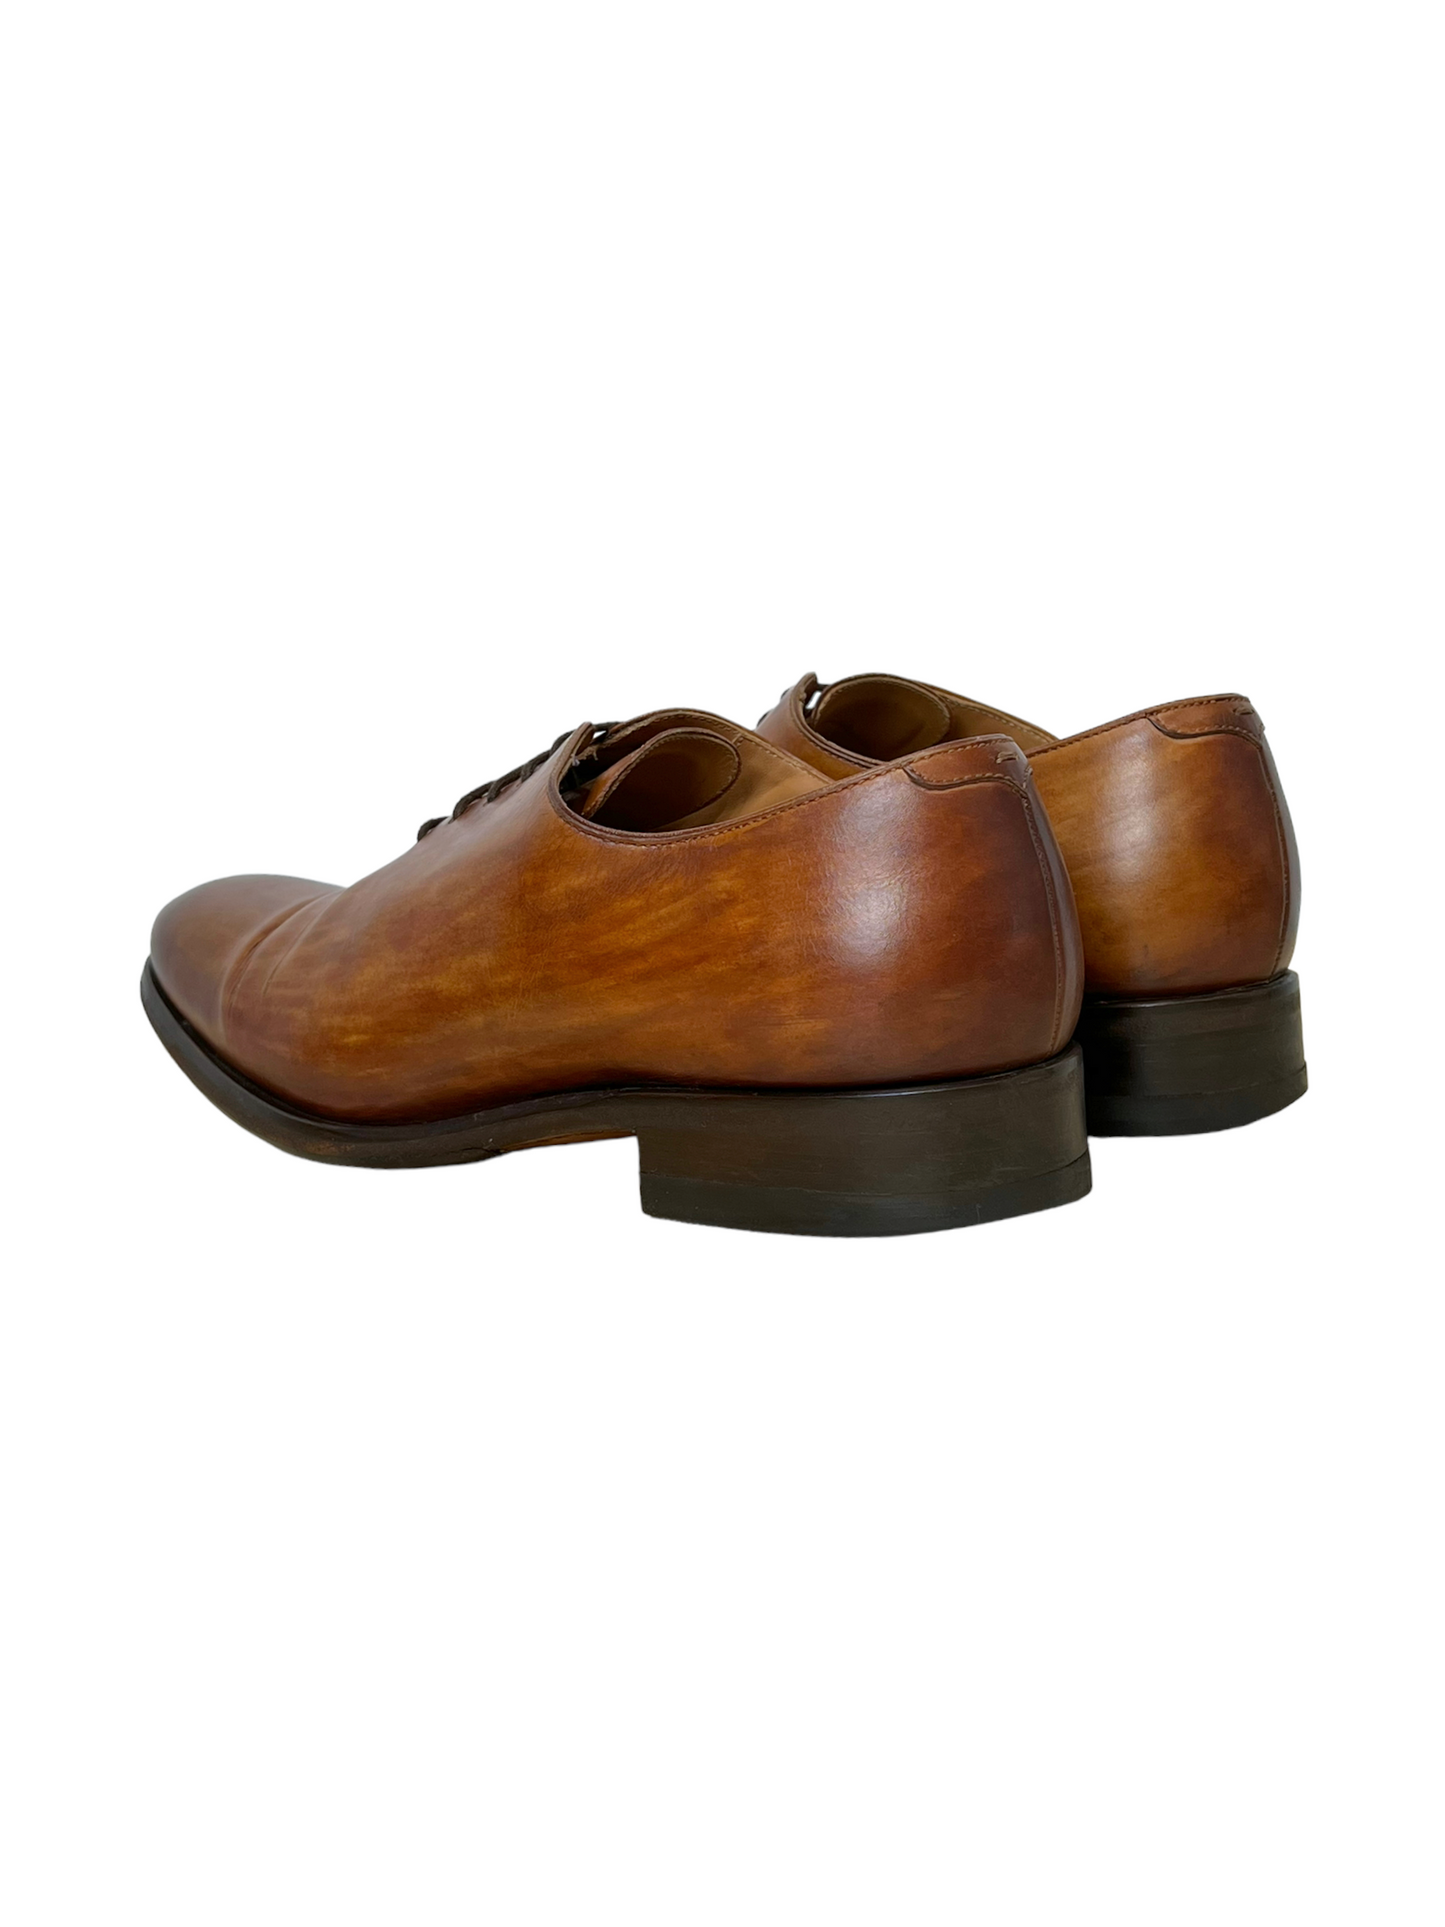 Magnanni Tan Leather Full Cut Oxford Dress Shoes - Genuine Design Luxury Consignment for Men. New & Pre-Owned Clothing, Shoes, & Accessories. Calgary, Canada